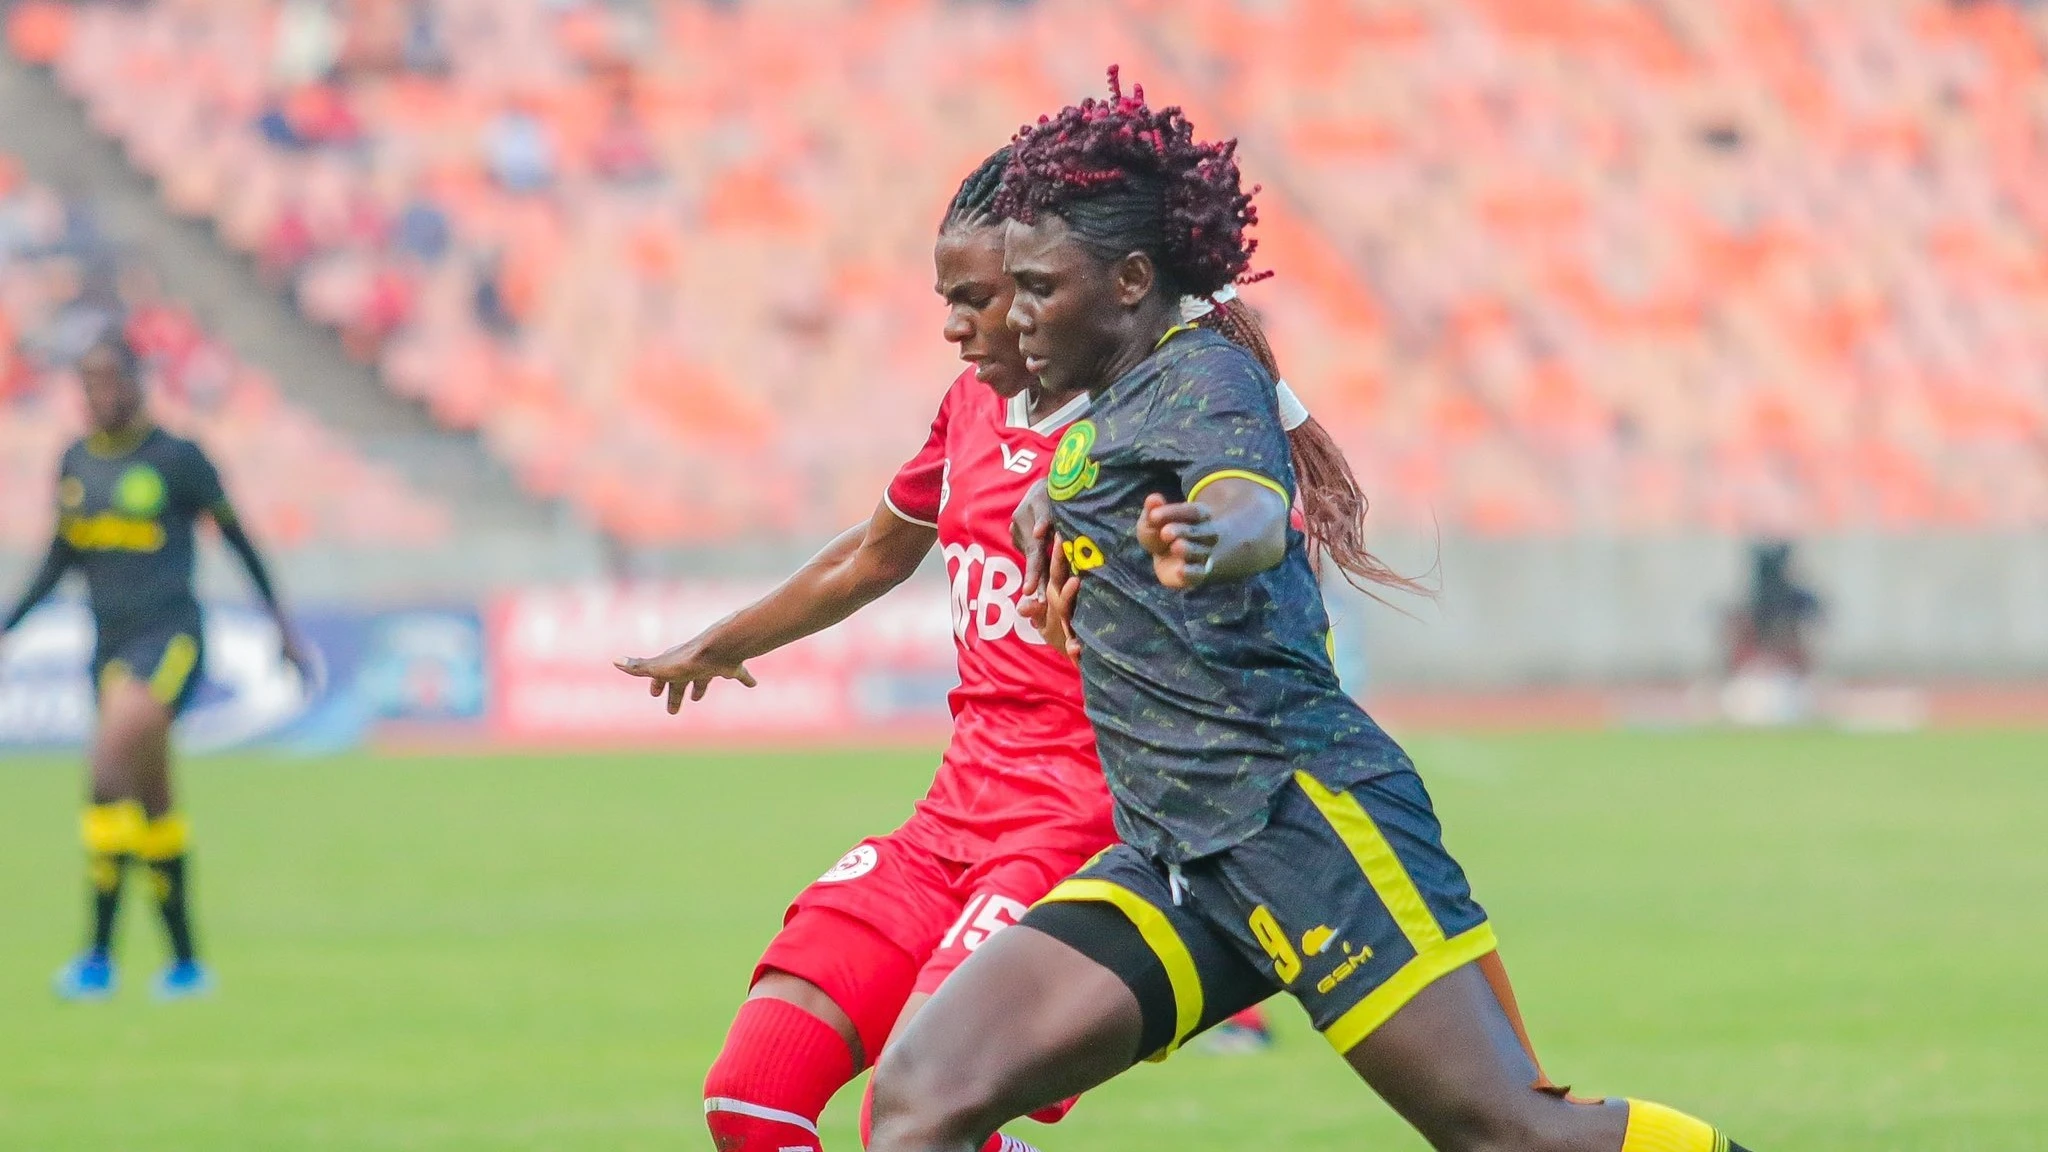 Yanga Princess' Nigerian forward, Blessing Nkor (R), negotiates her way past Simba Queens' left-back Diana William when the two outfits took on each other in the previous season's Serengeti Lite Women's Premier League (SWPL) 